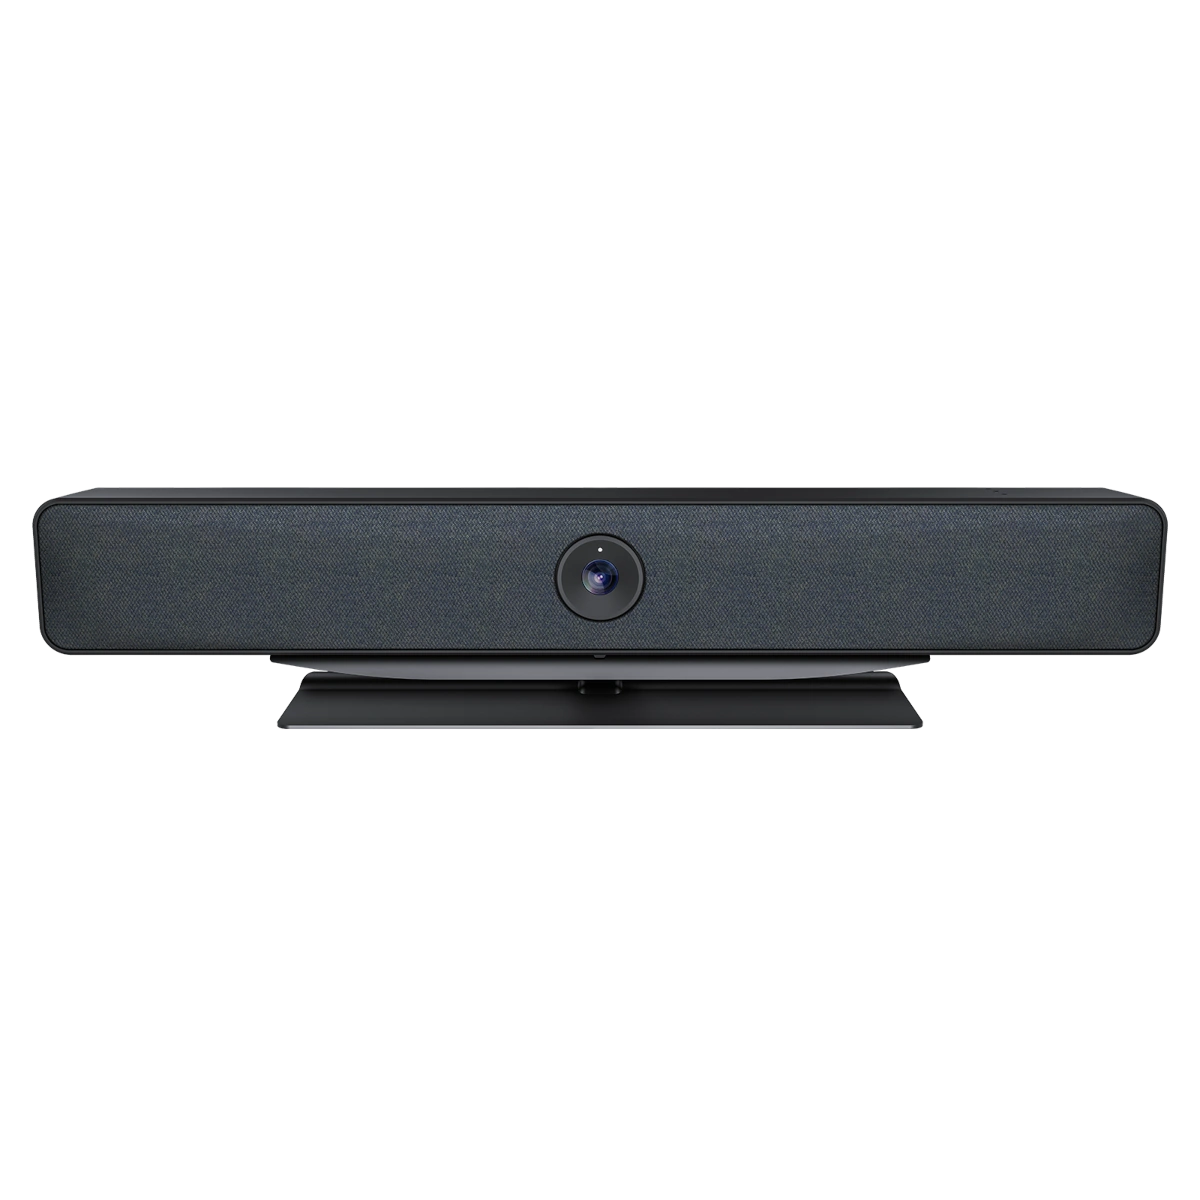 Axtel AX-4K Business Webcam - Axtel World - Headsets, Phones. Axtel is  delivering communication solutions.